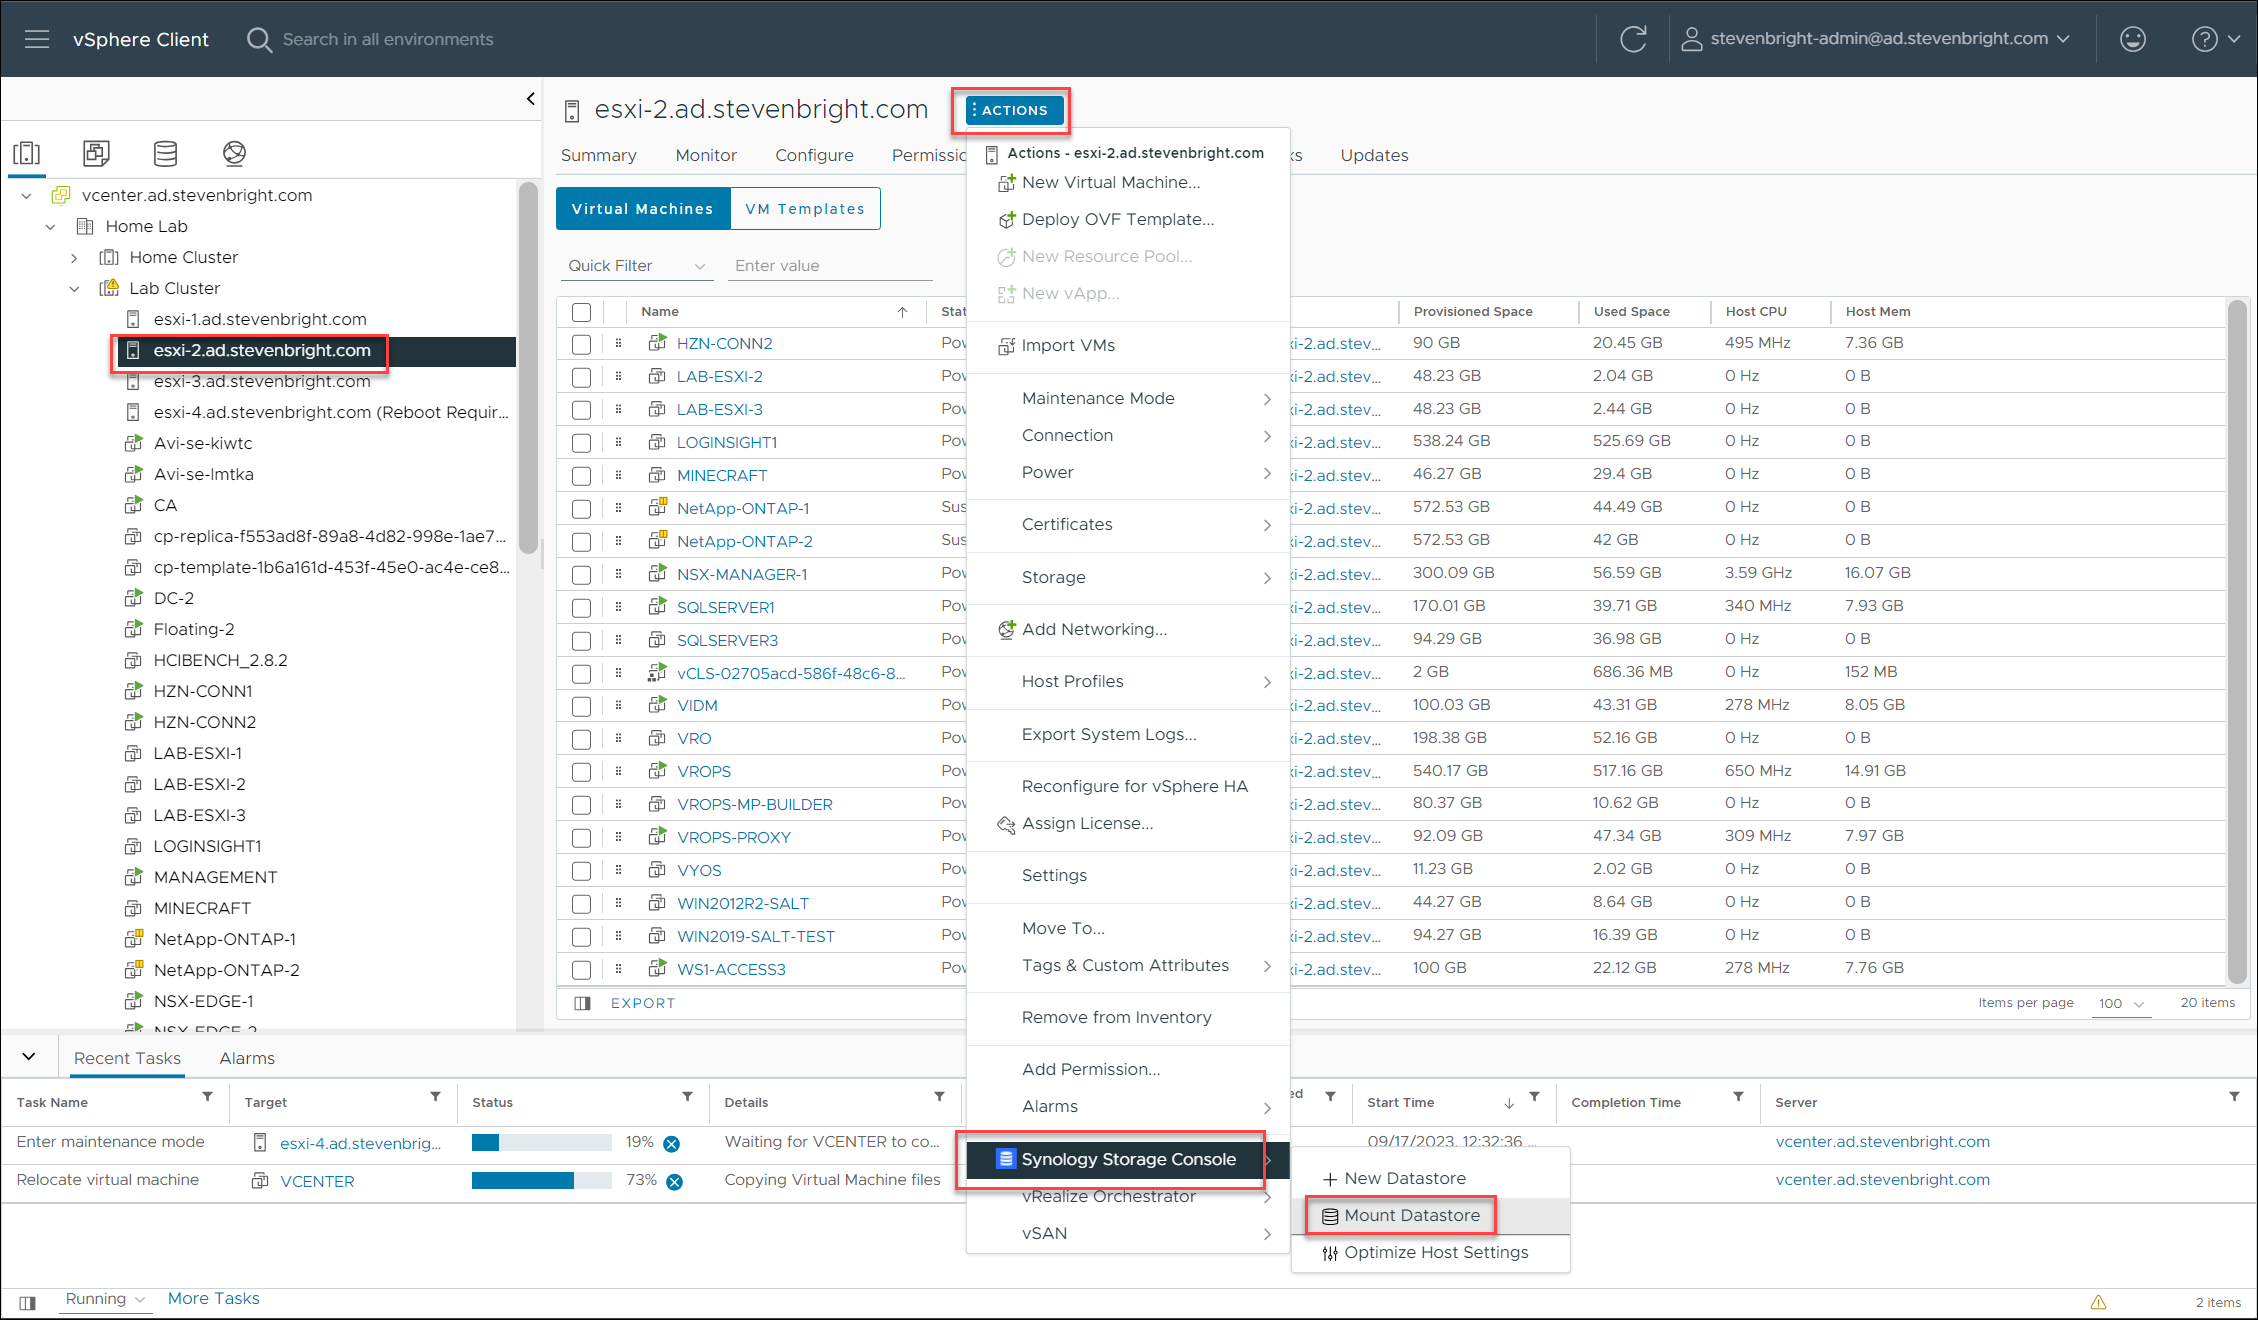 VMware vSphere Client - Accessing the Synology Storage Console Mount Datastore Option